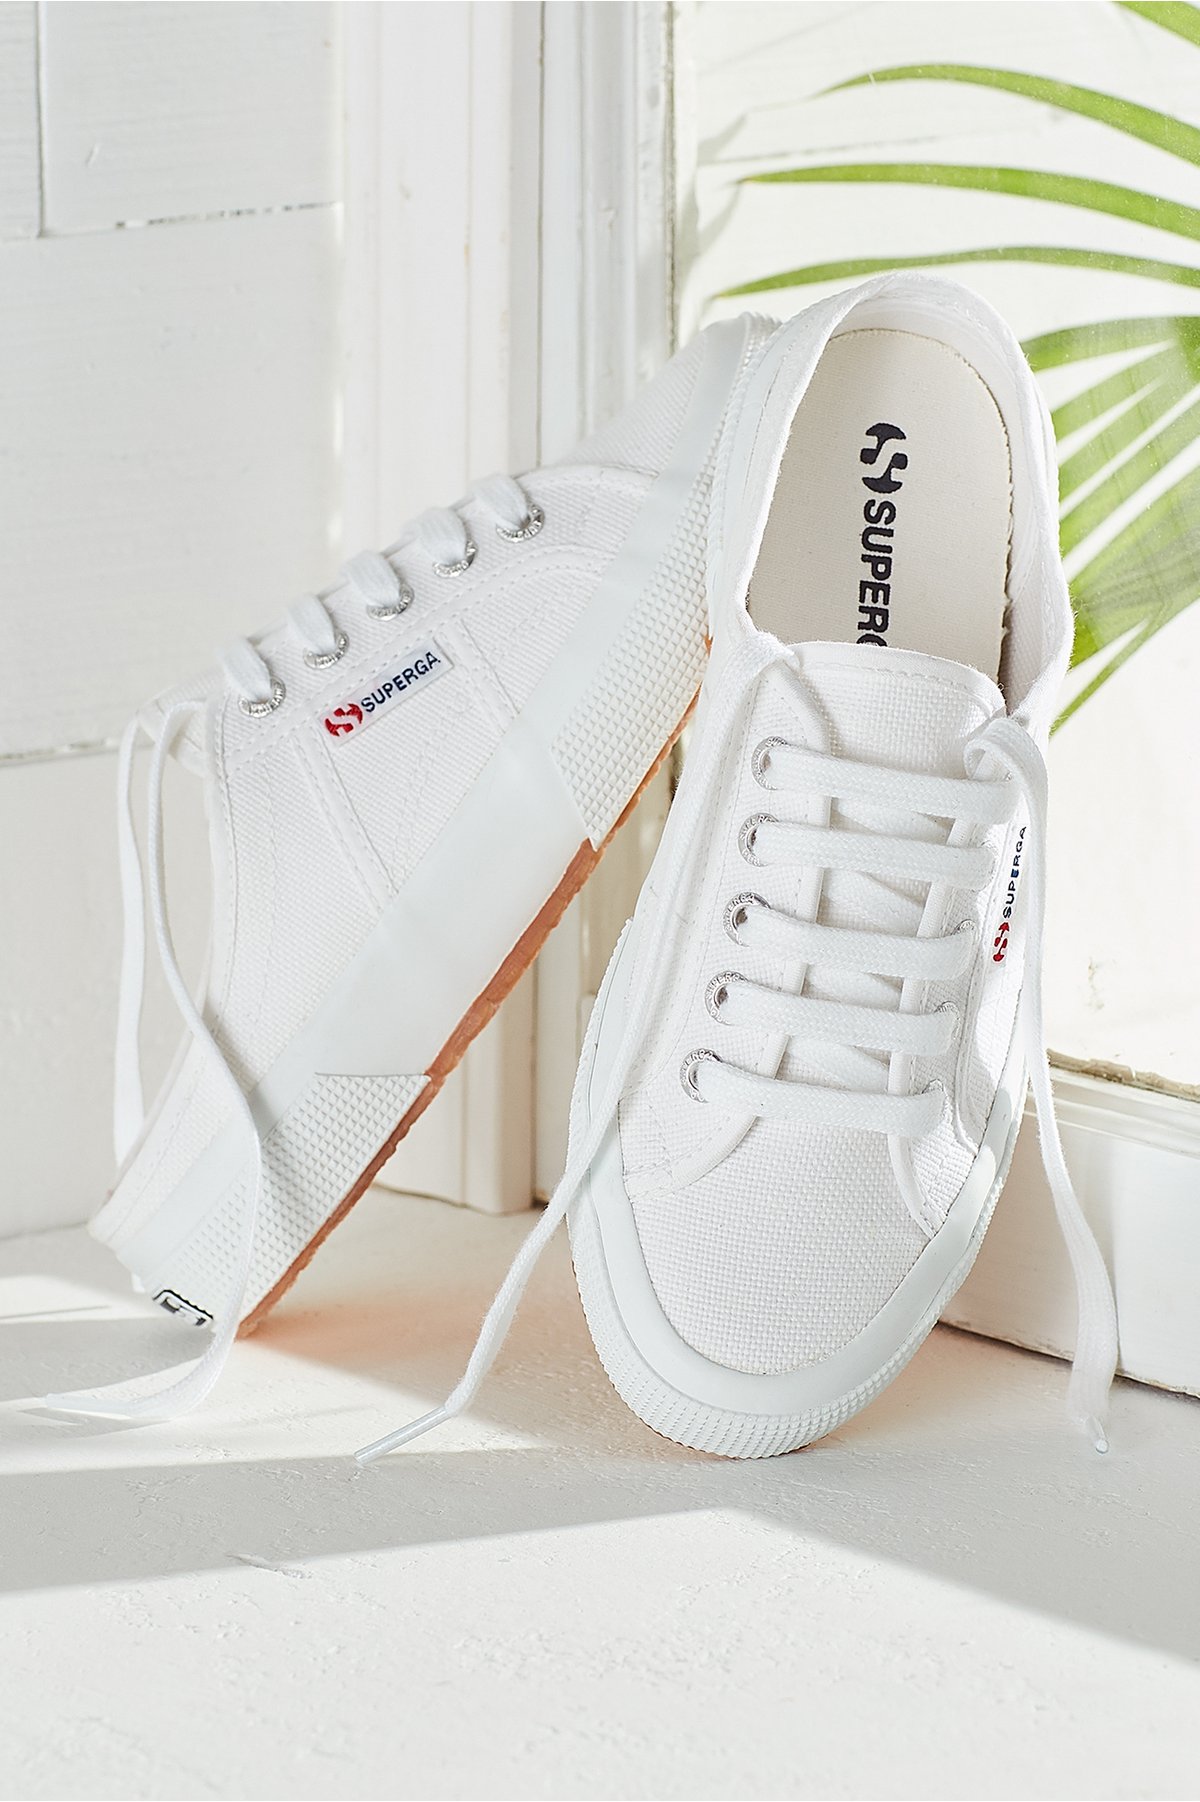 Superga Backless Sneakers | Soft Surroundings Outlet